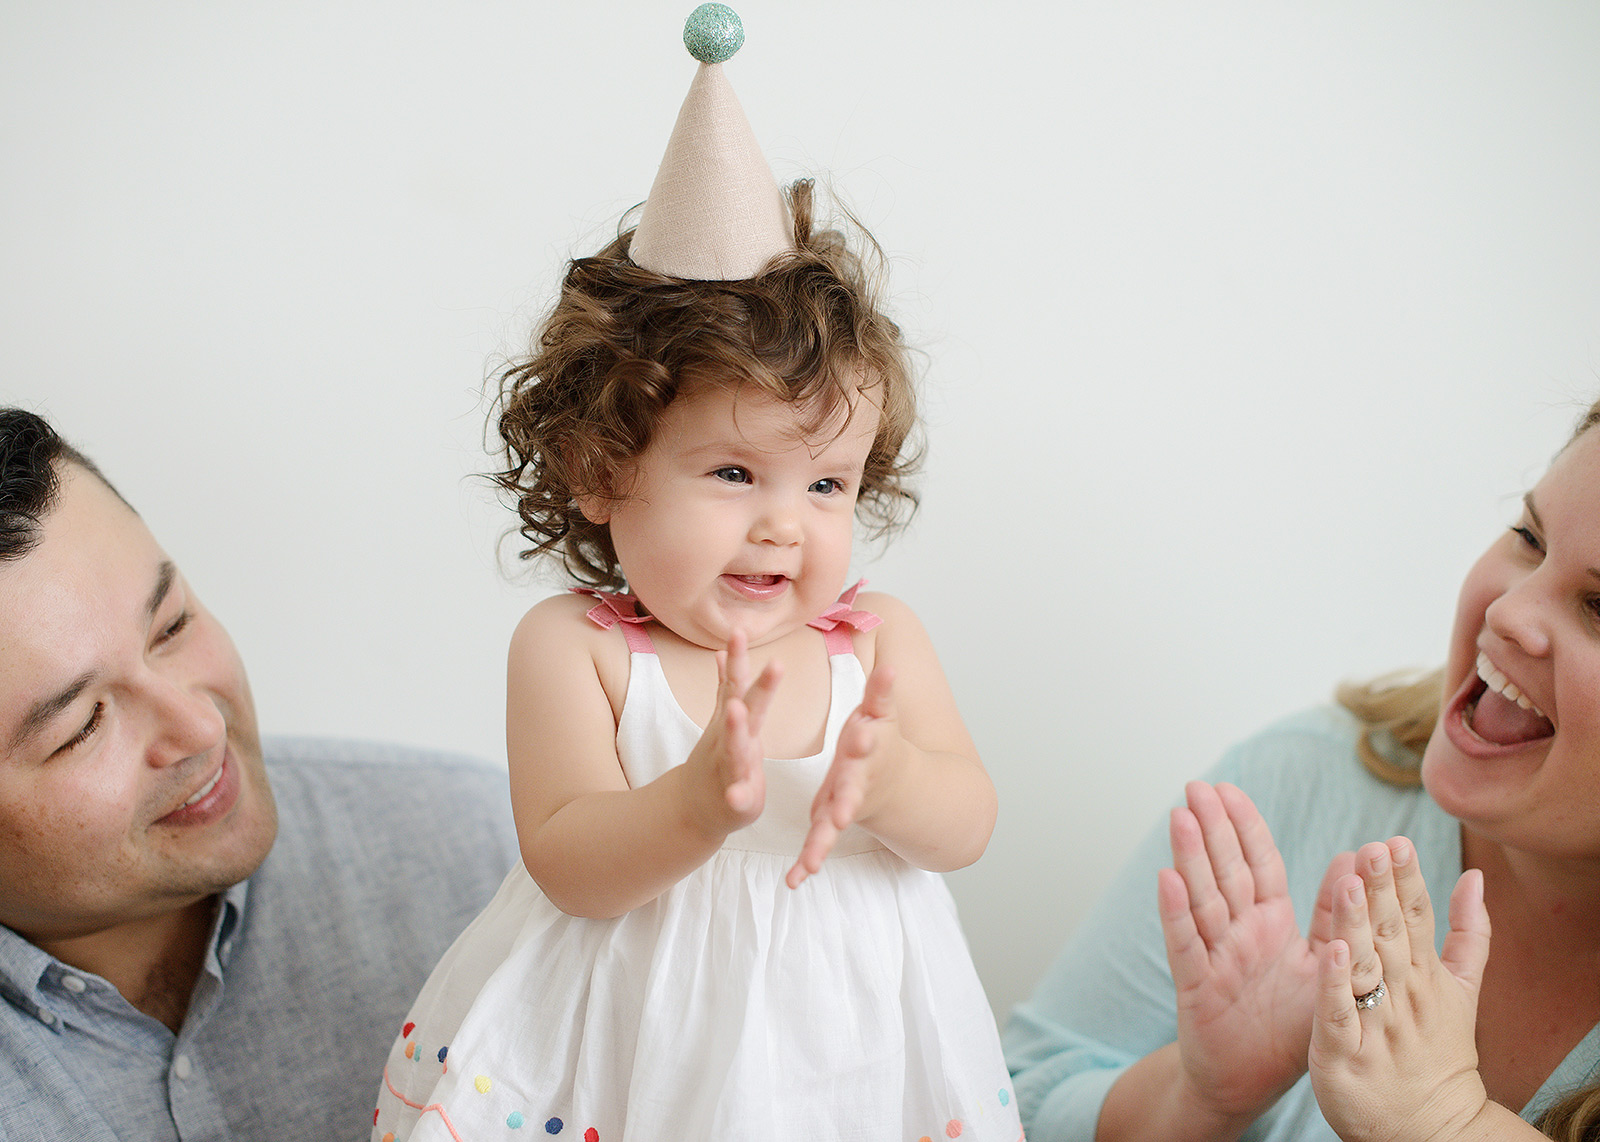 Baby Girl's First Birthday in Party Hat and Parents Clapping